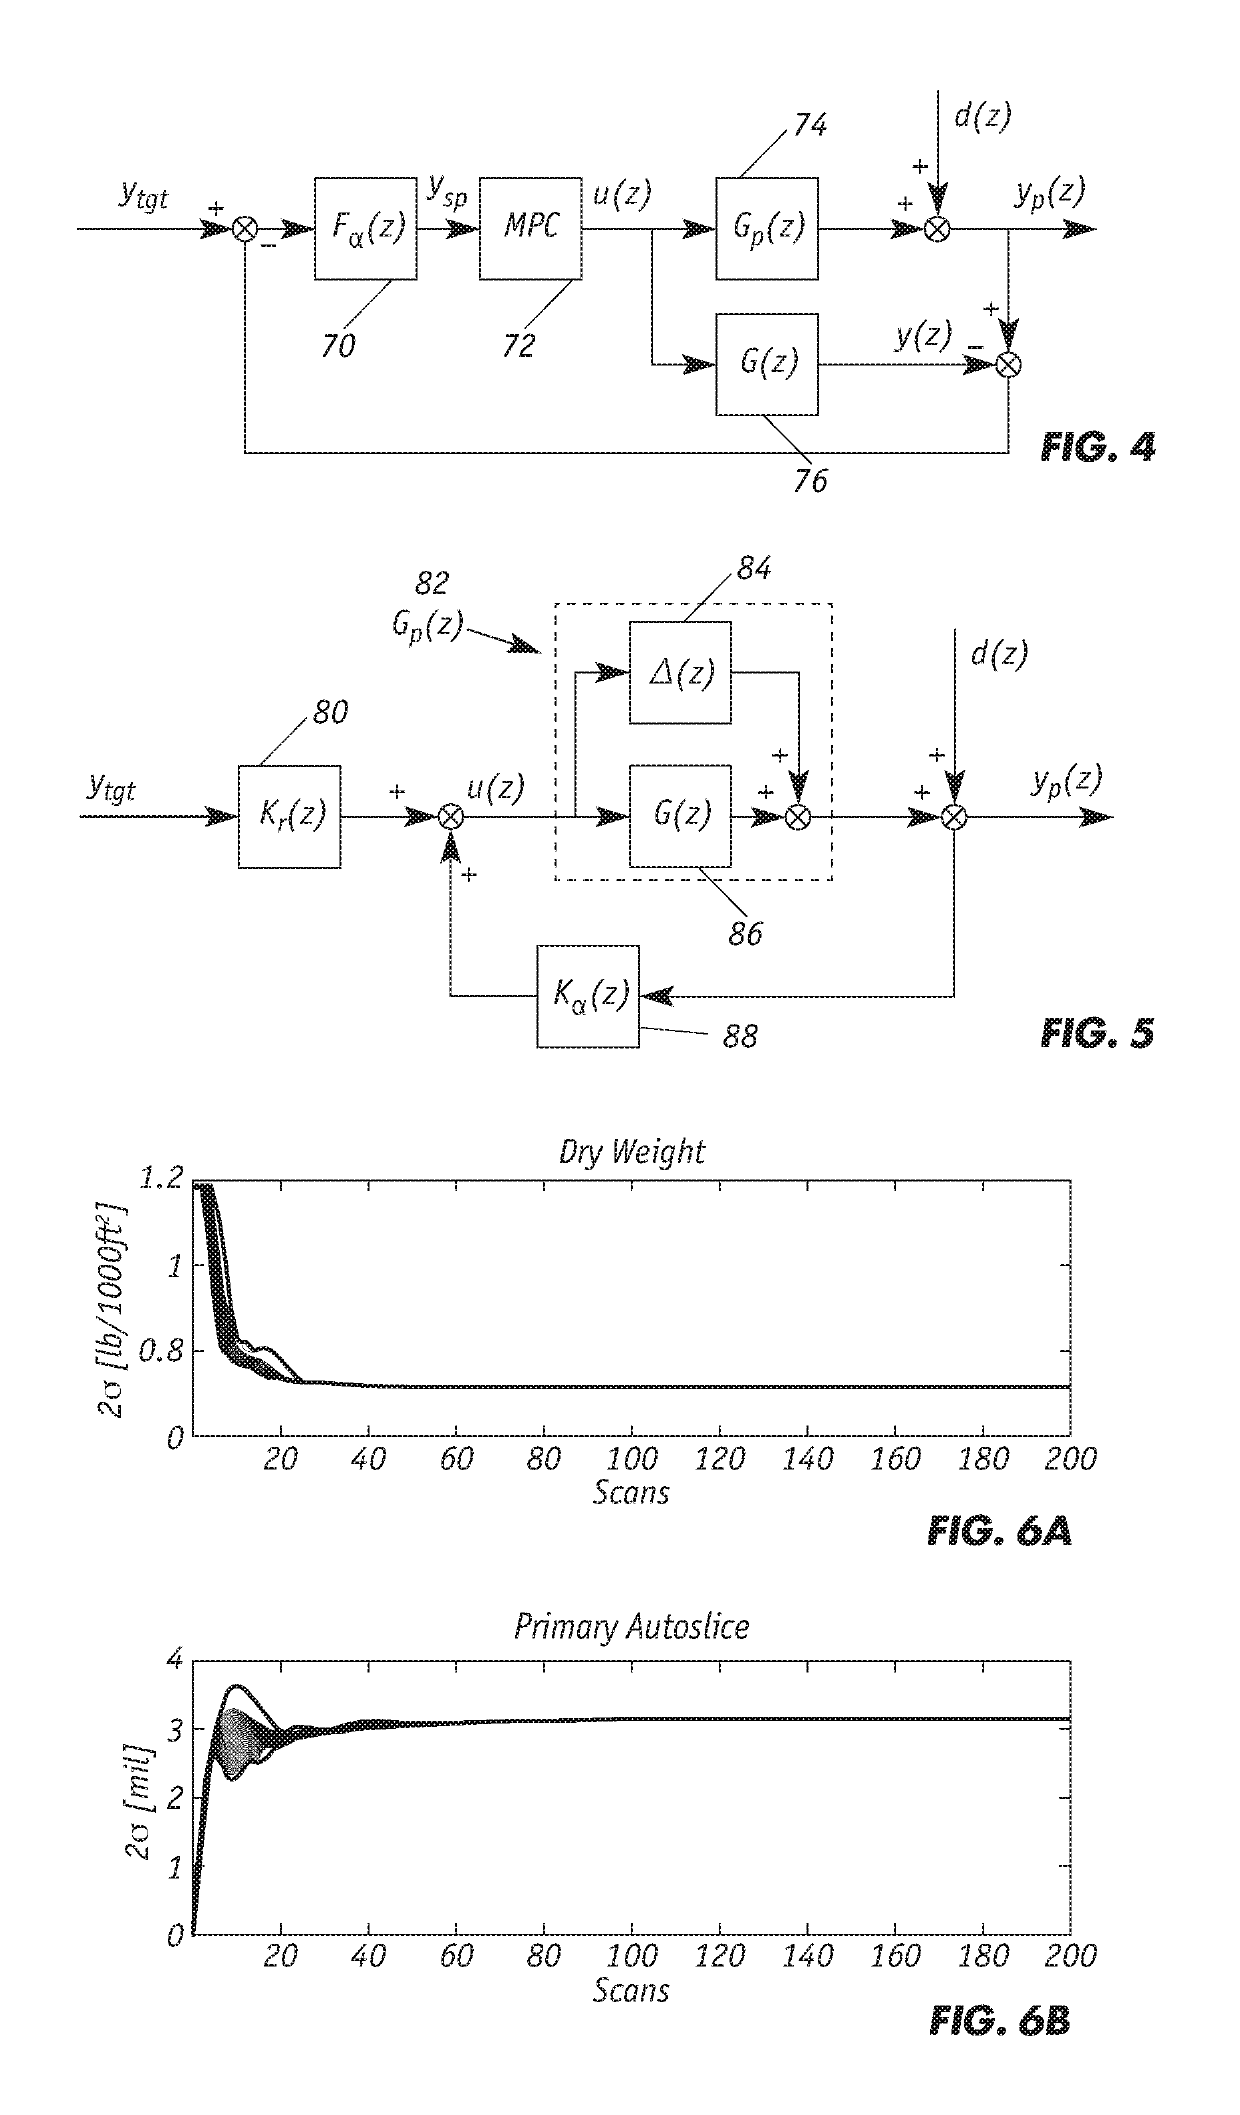 Method of designing model predictive control for cross directional flat sheet manufacturing processes to guarantee temporal robust stability and performance